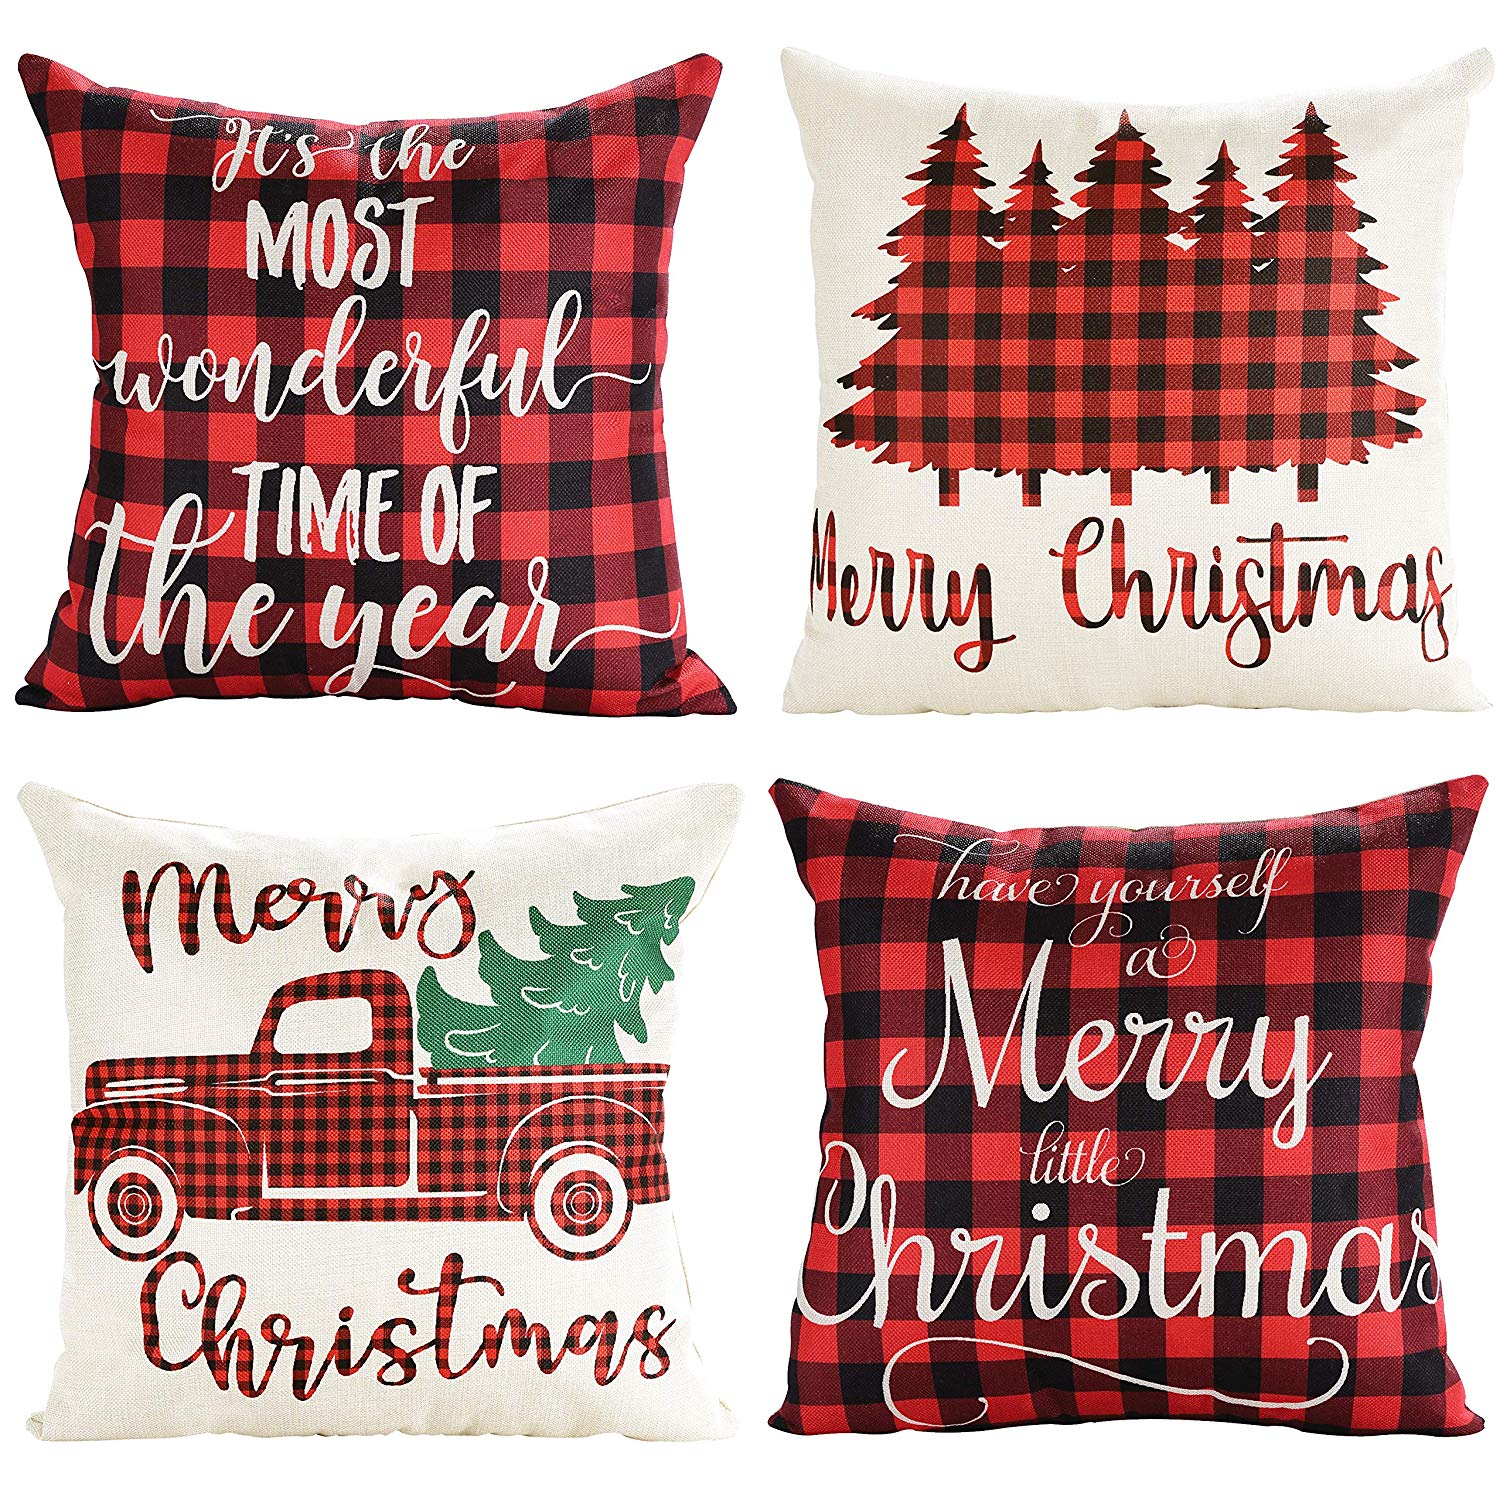 5 must have Christmas Amazon pillow covers